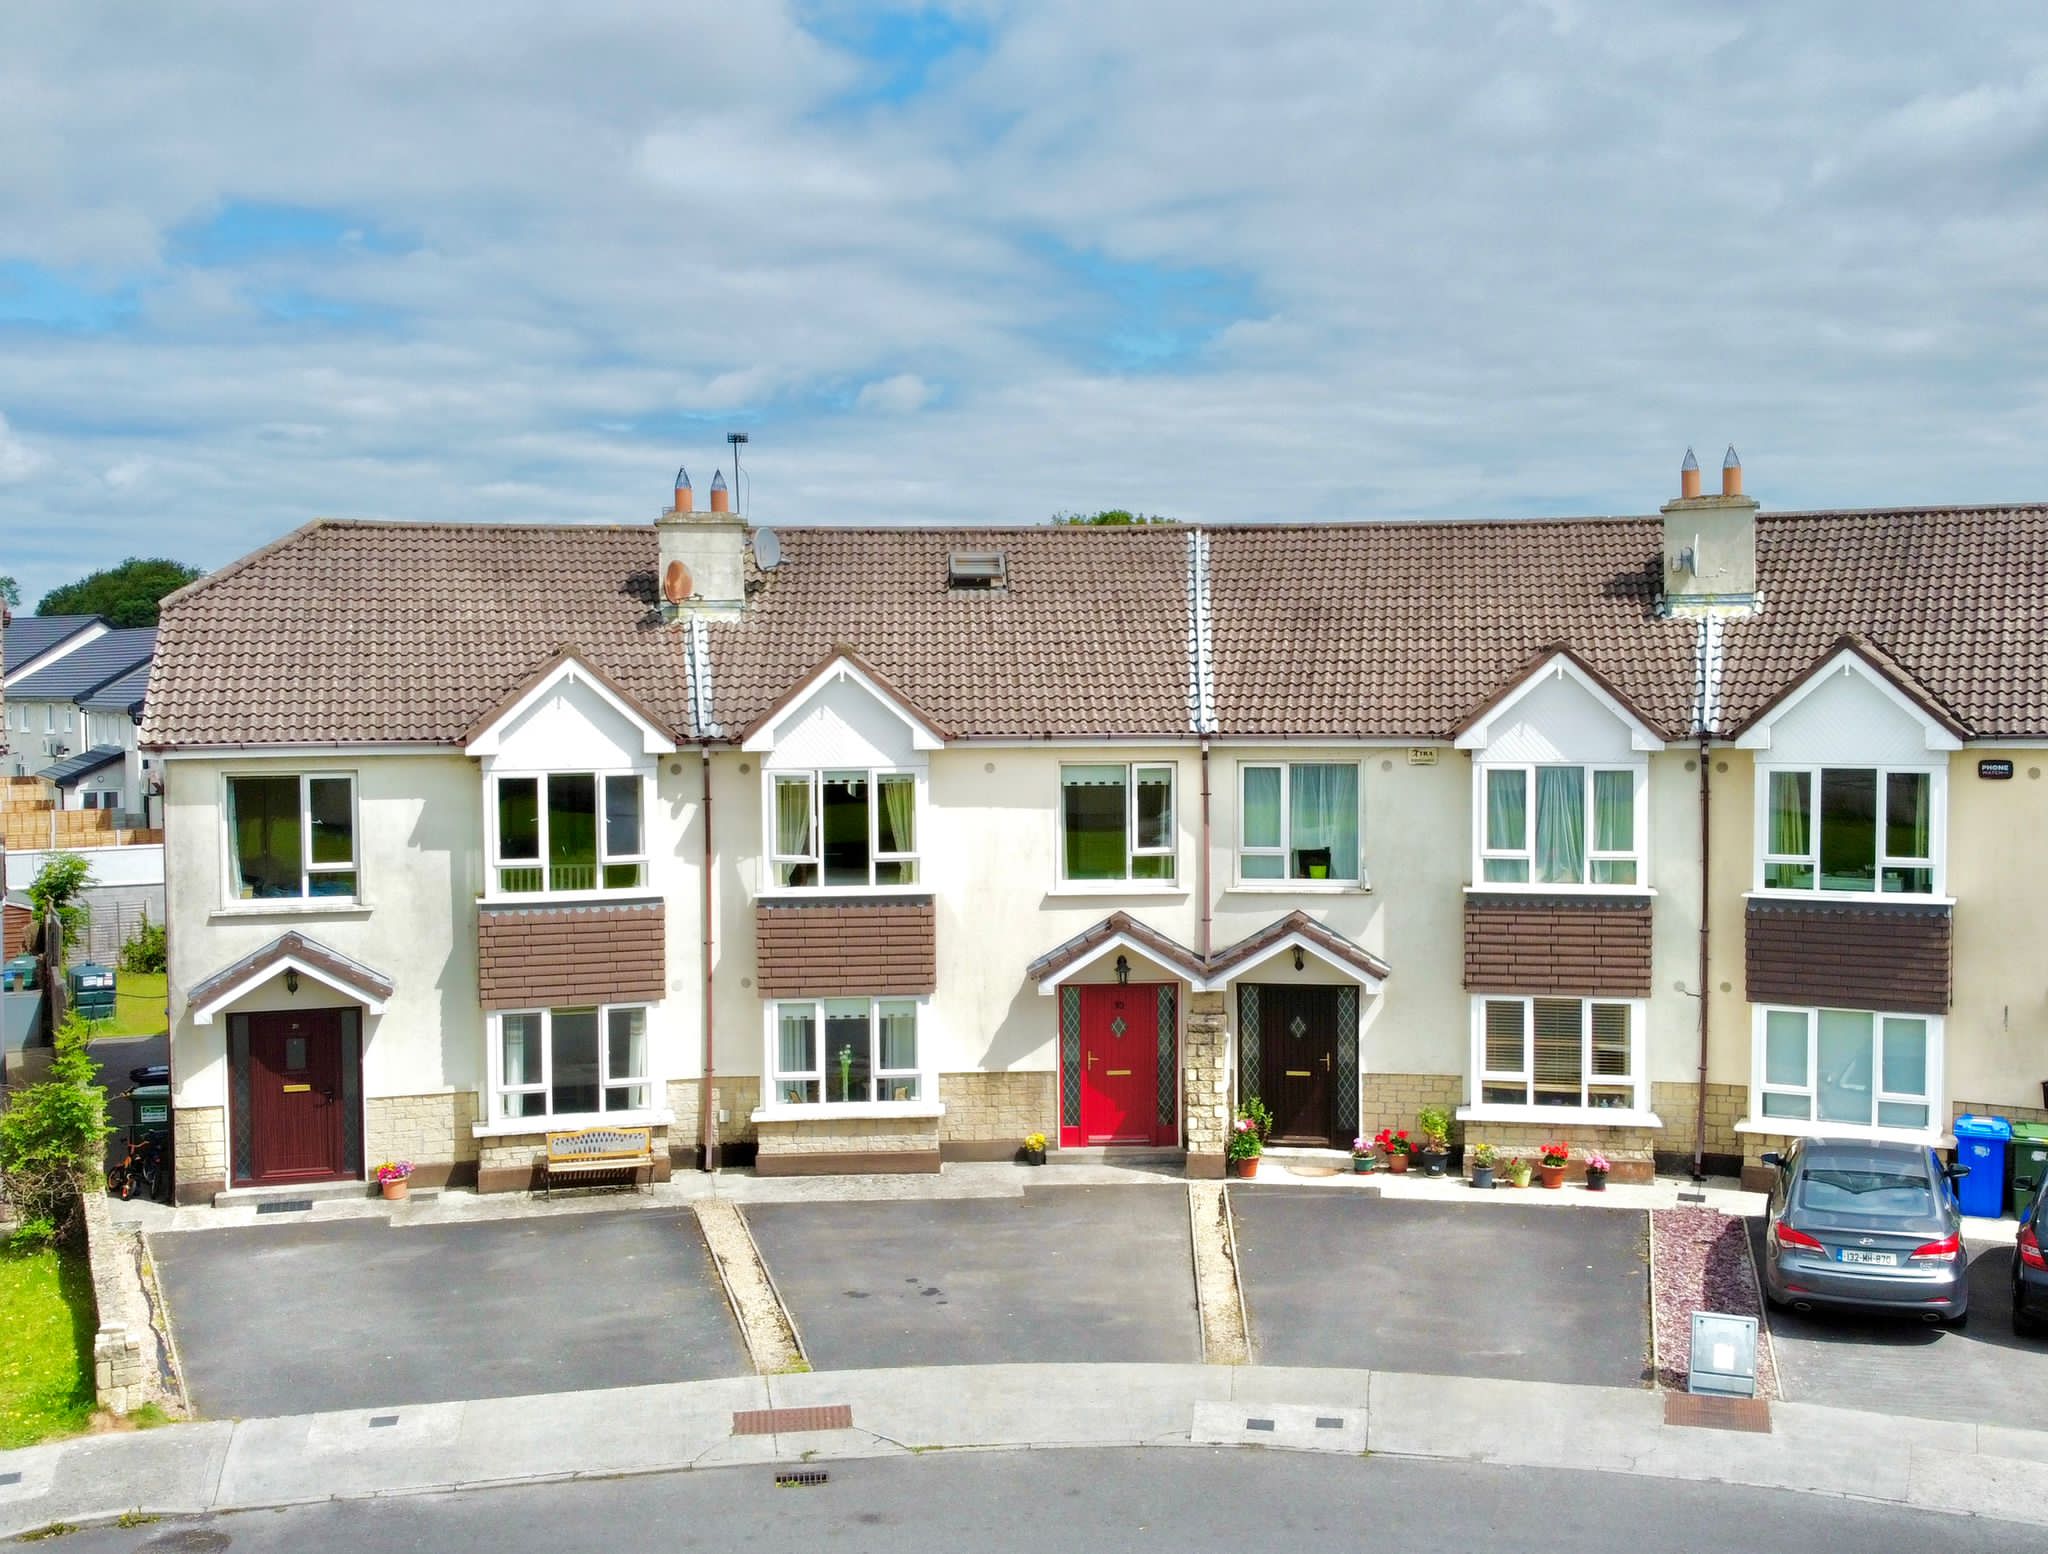 30 Mount William Court, Monksland, Athlone, Co. Roscommon, N37W0Y2